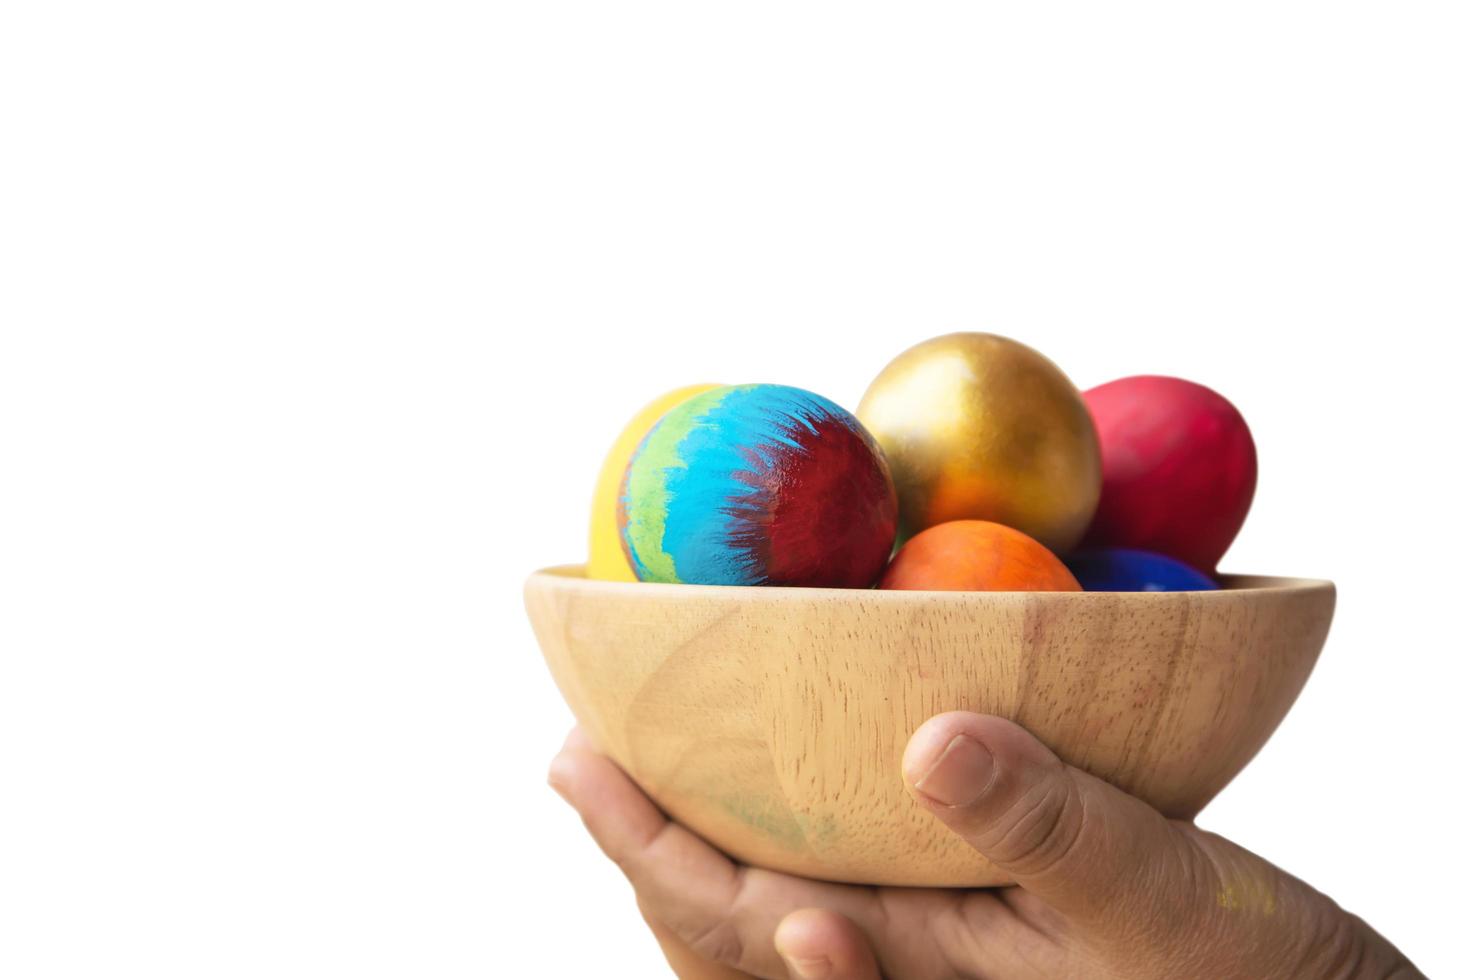 Child showing colorful Easter eggs happily - Easter holiday celebration concept photo